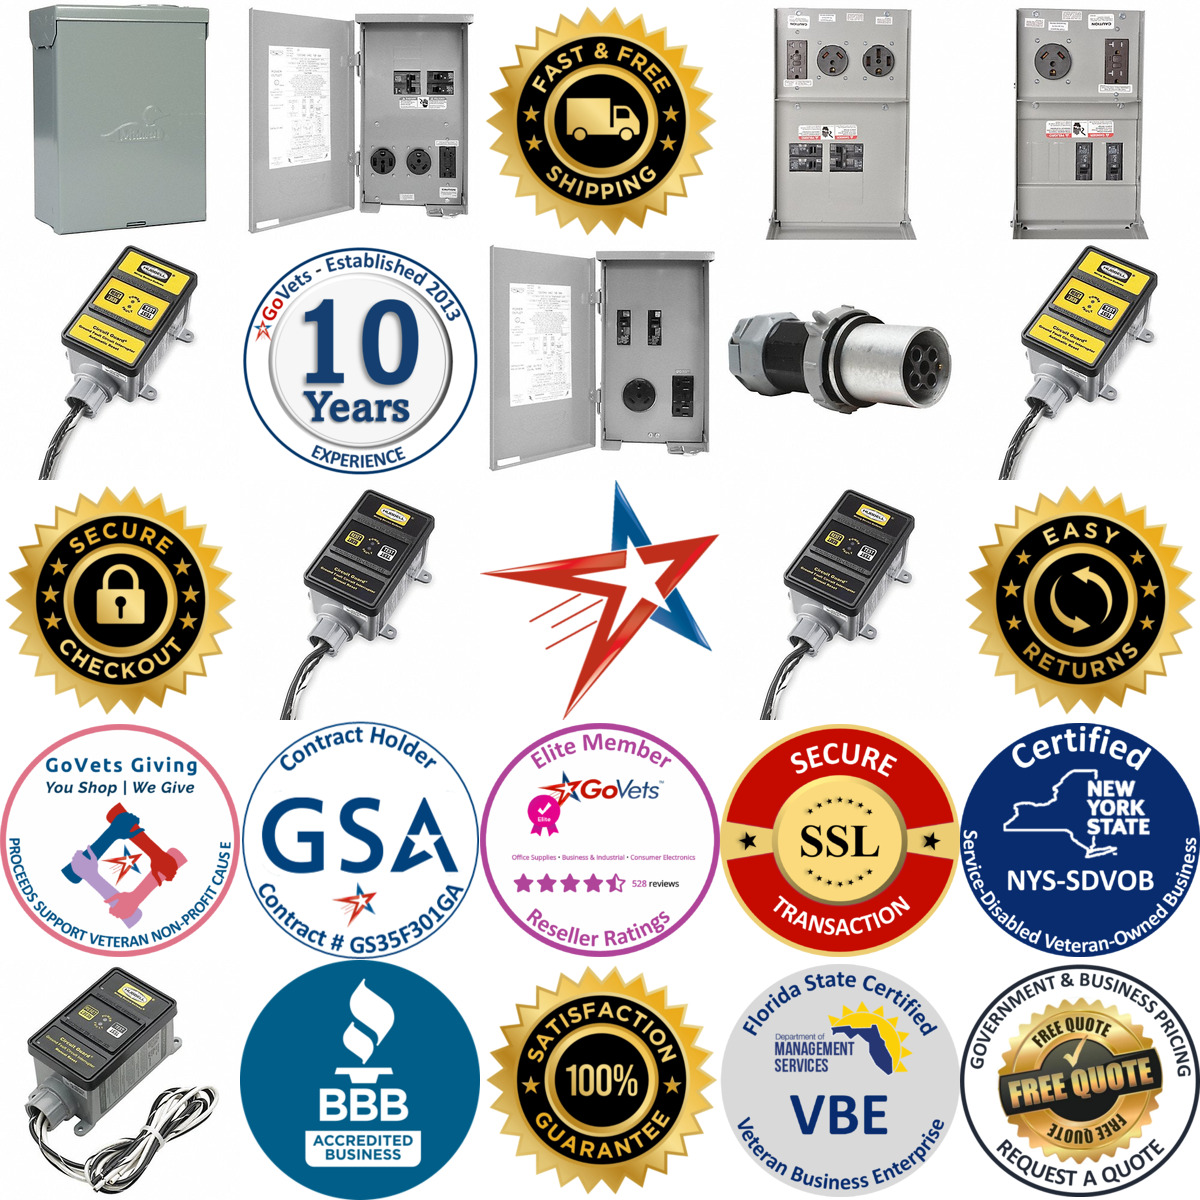 A selection of Hard Wired Gfci products on GoVets